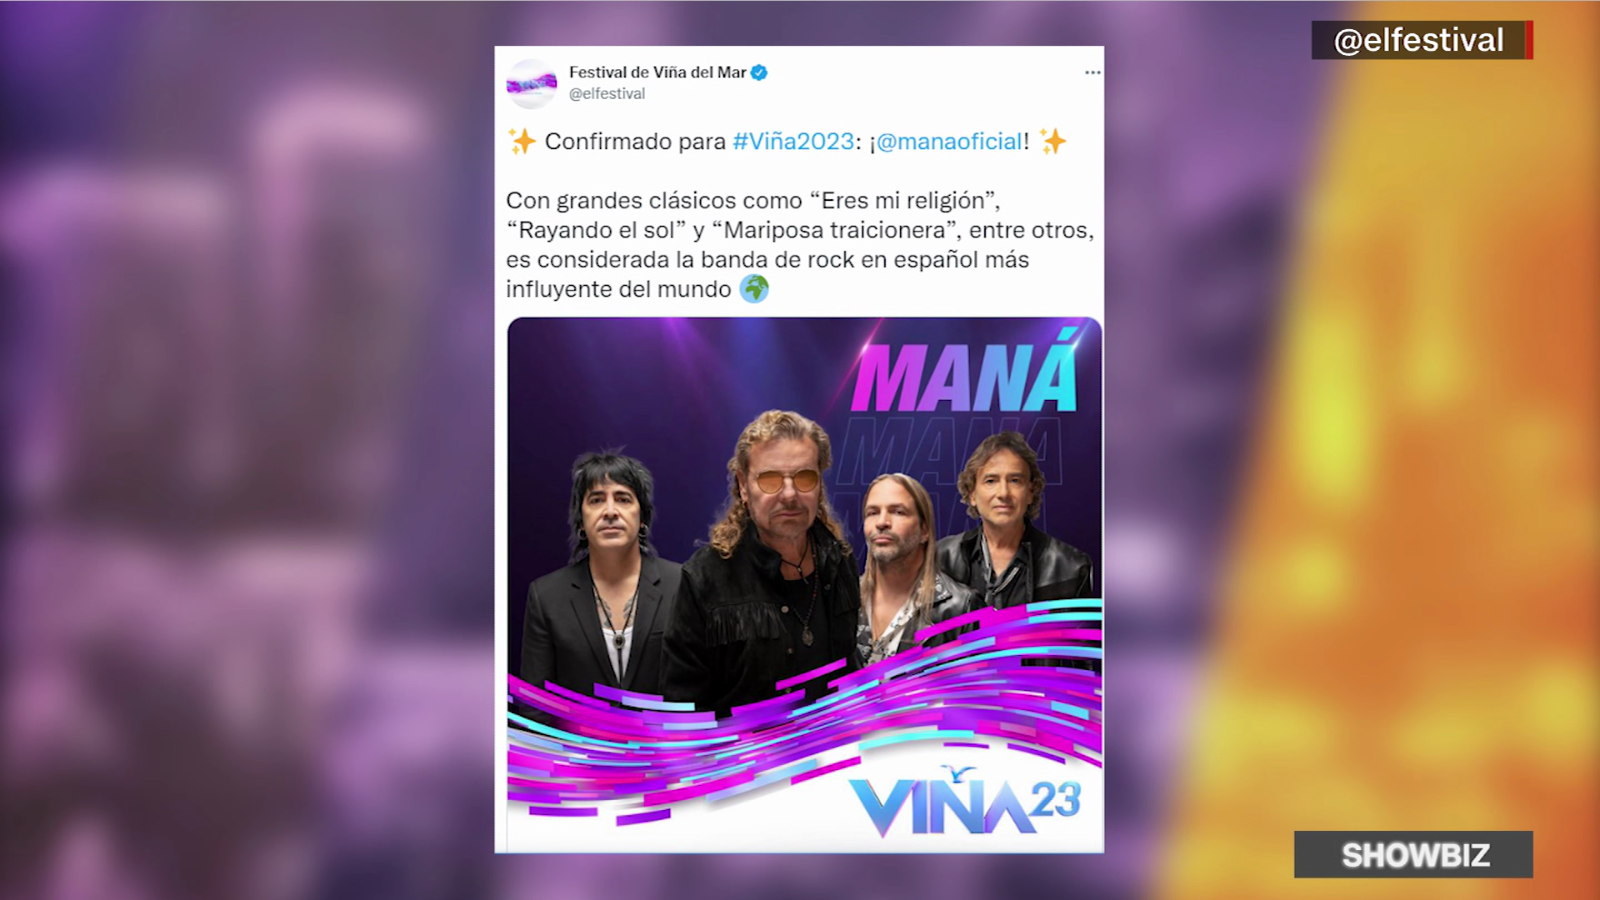 Viña del Mar confirms the names of some of the artists for 2023 The